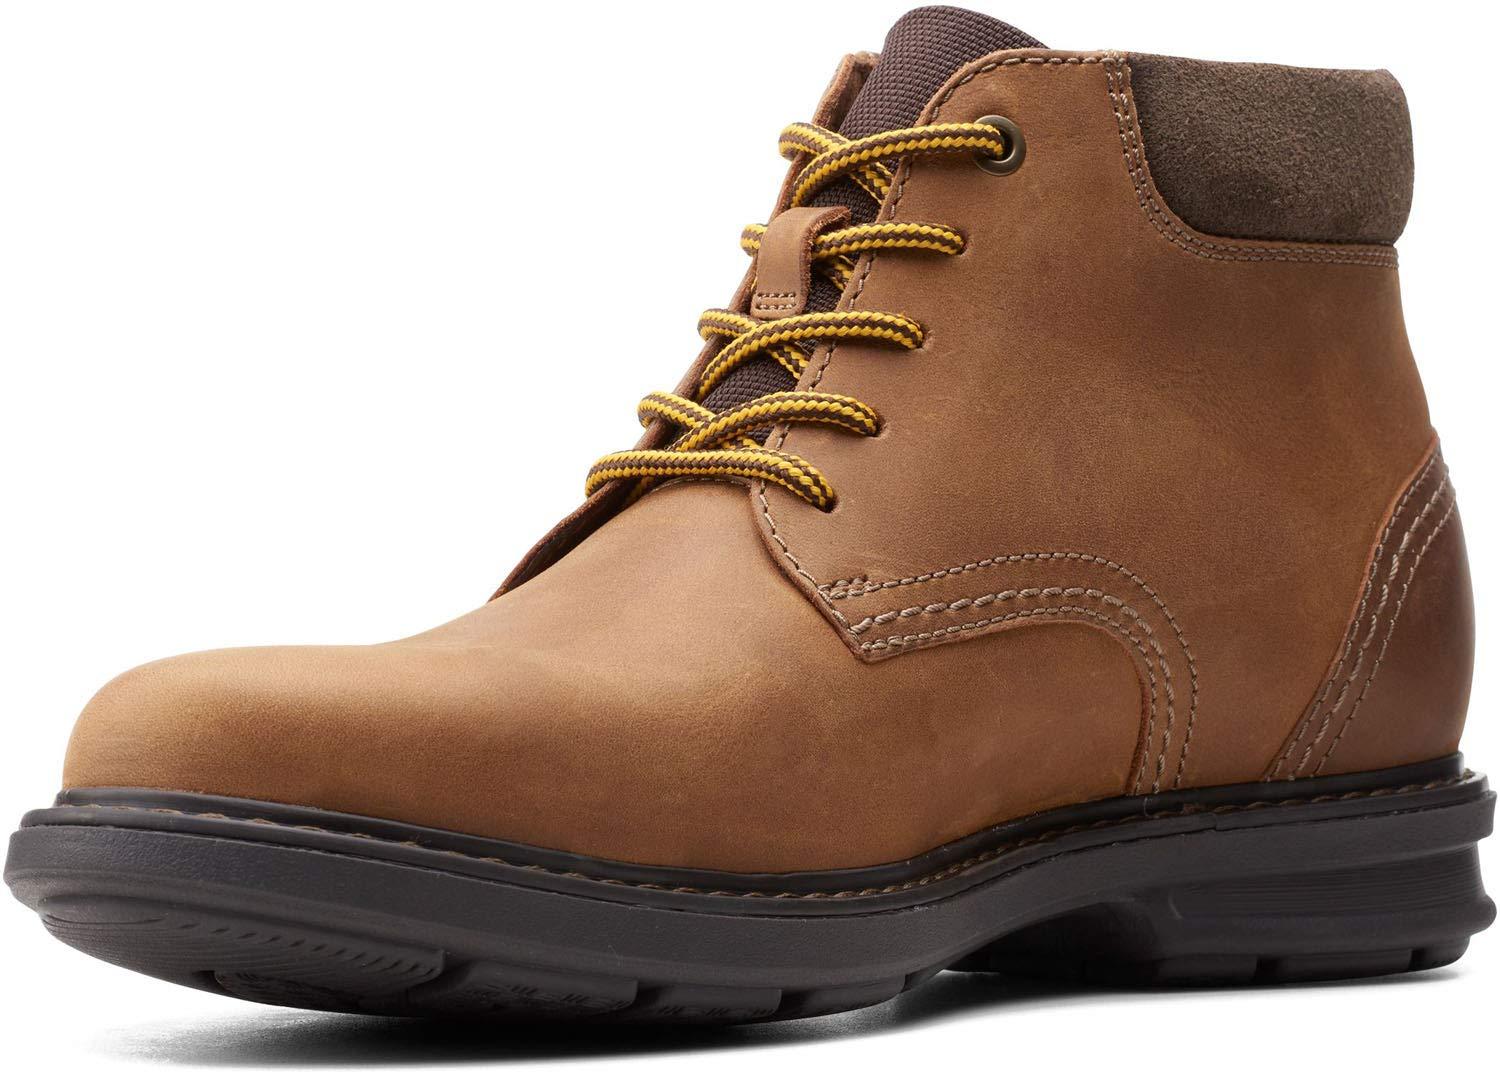 Clarks Leather S Rendell Work Boots in Dark Brown Leather (Brown) for Men -  Save 43% - Lyst